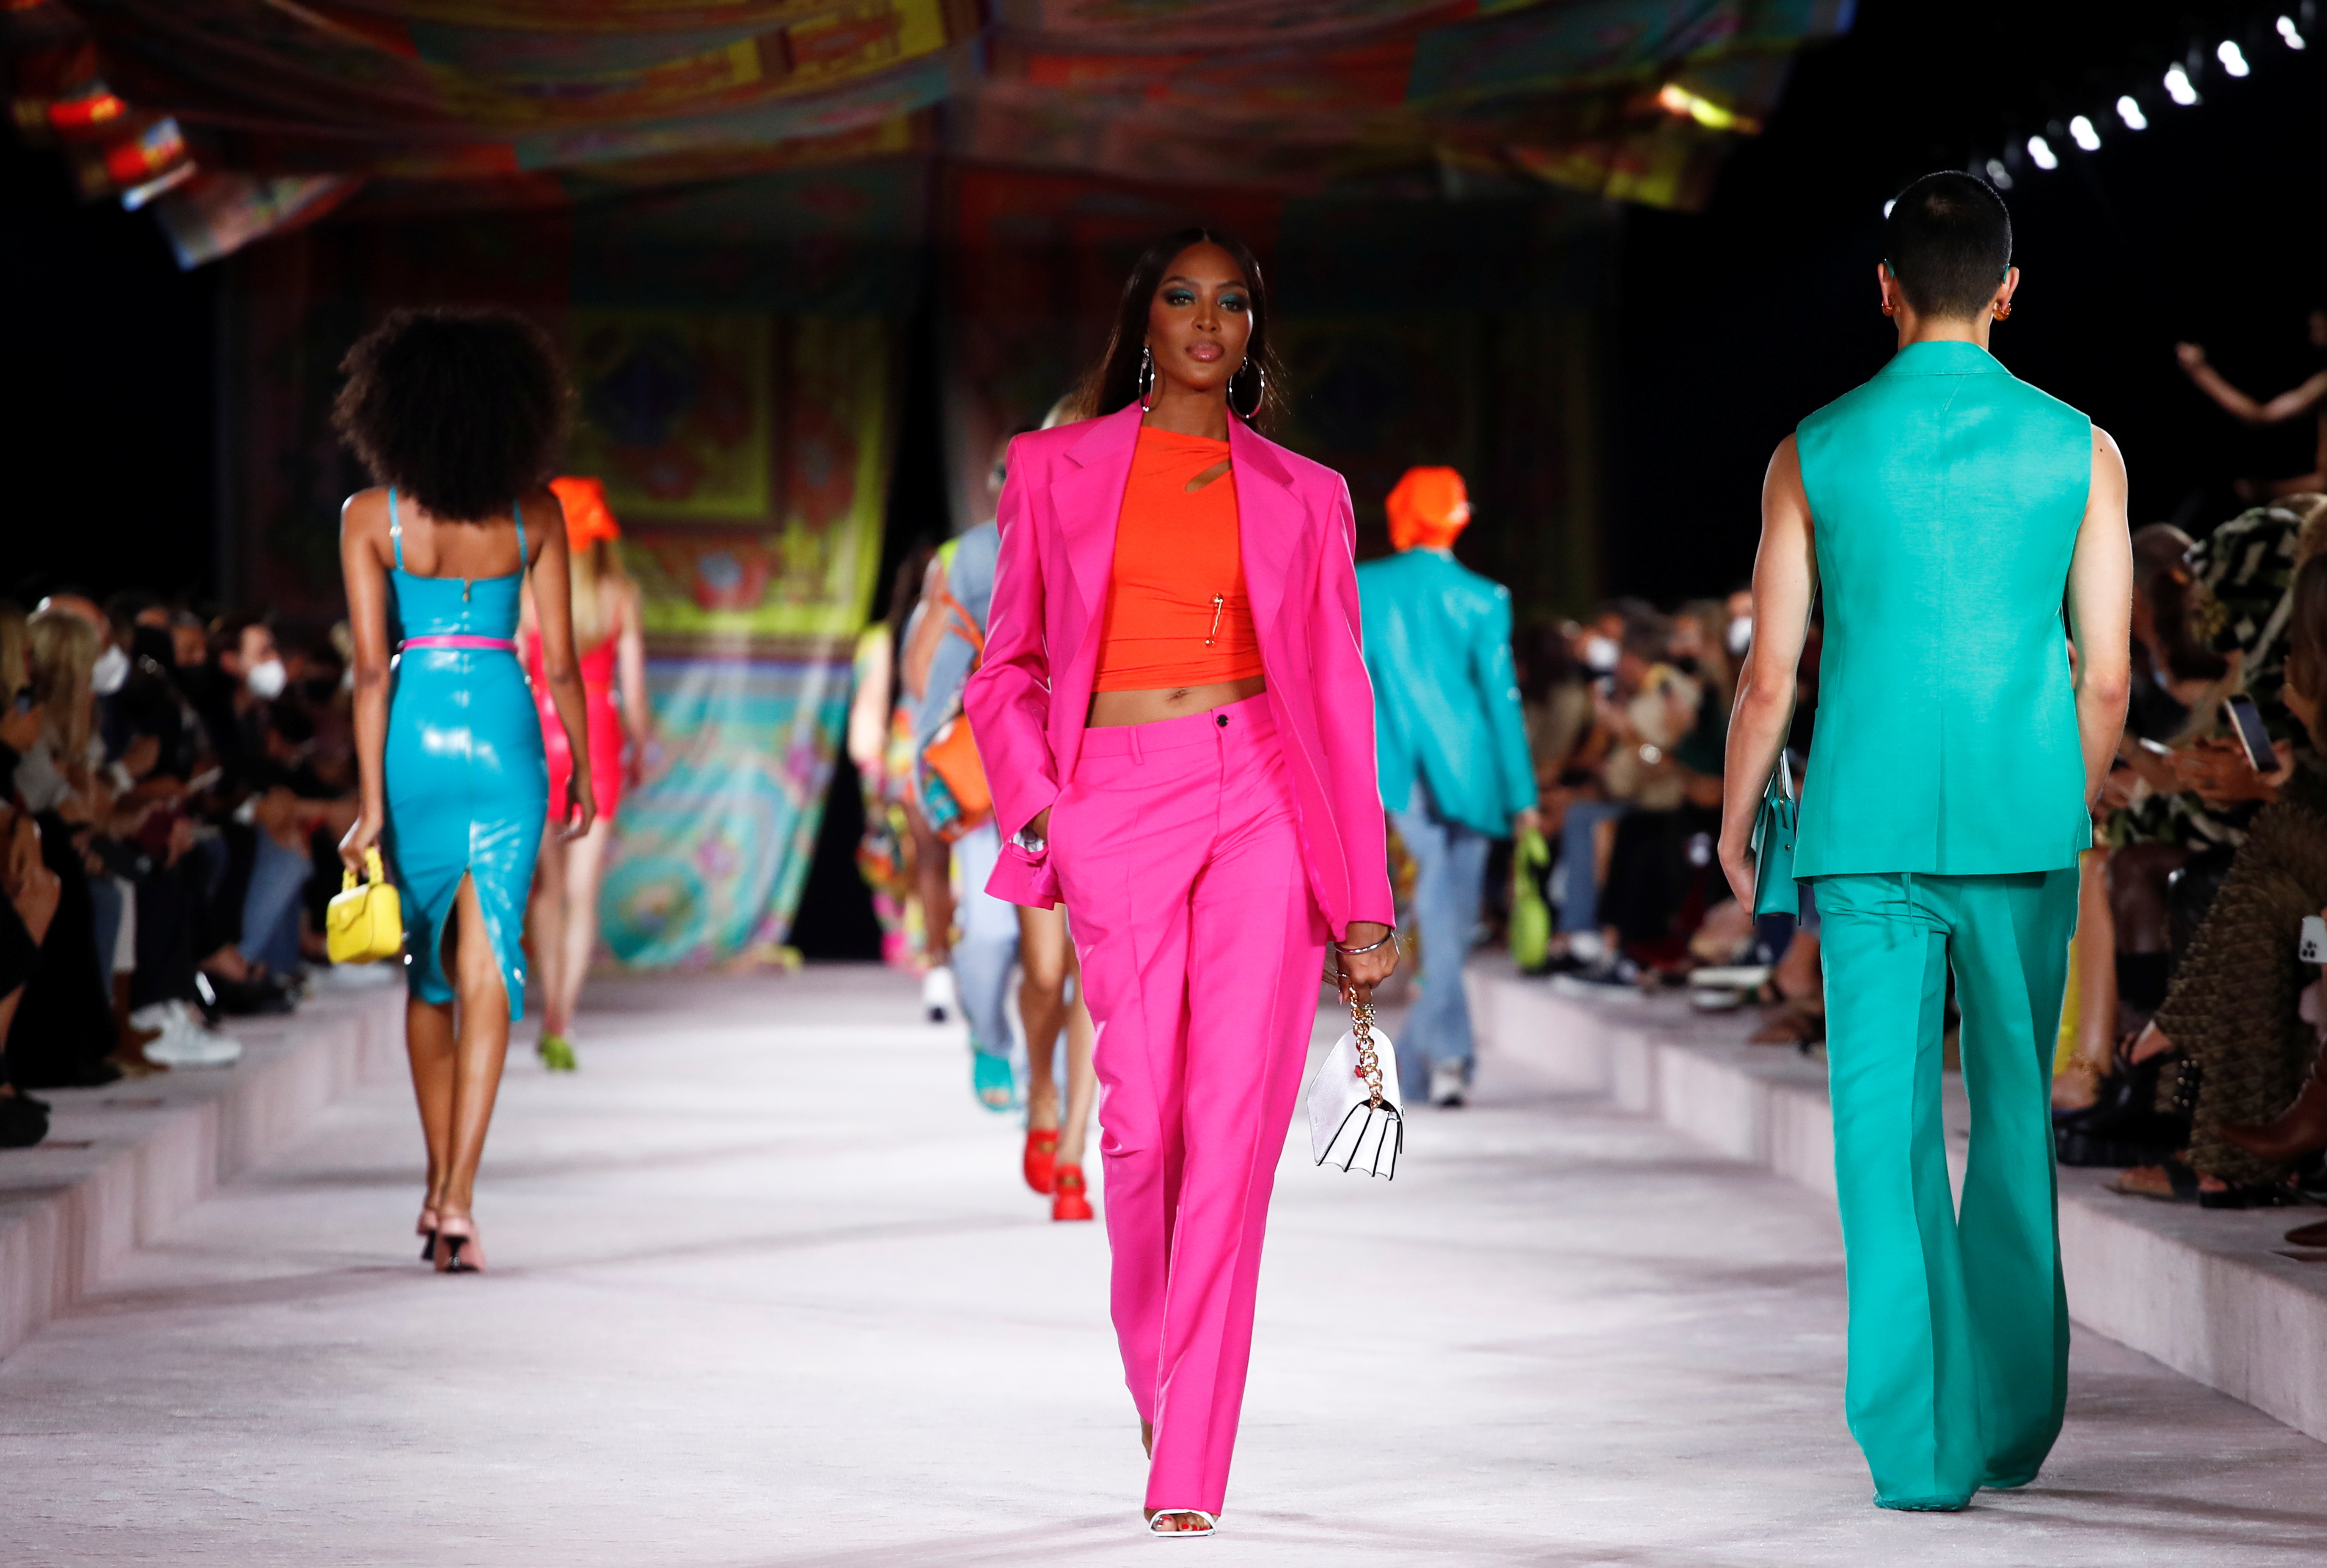 Versace presents its Spring/Summer 2022 collection during Milan Fashion Week